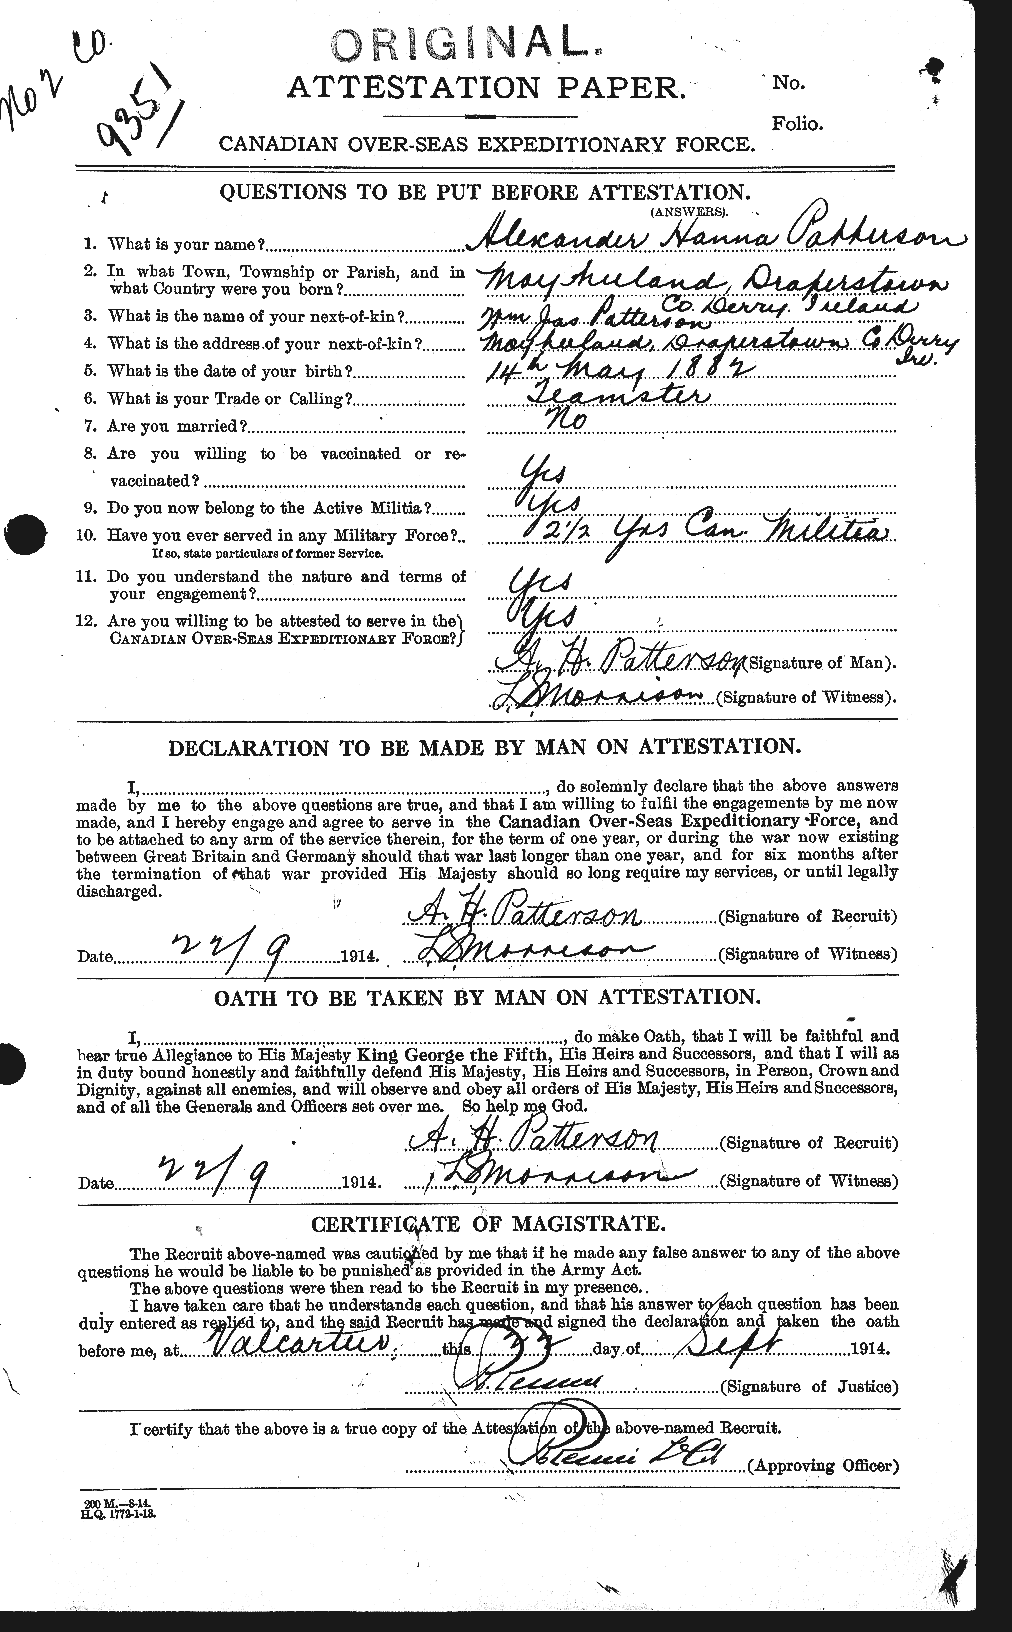 Personnel Records of the First World War - CEF 568212a